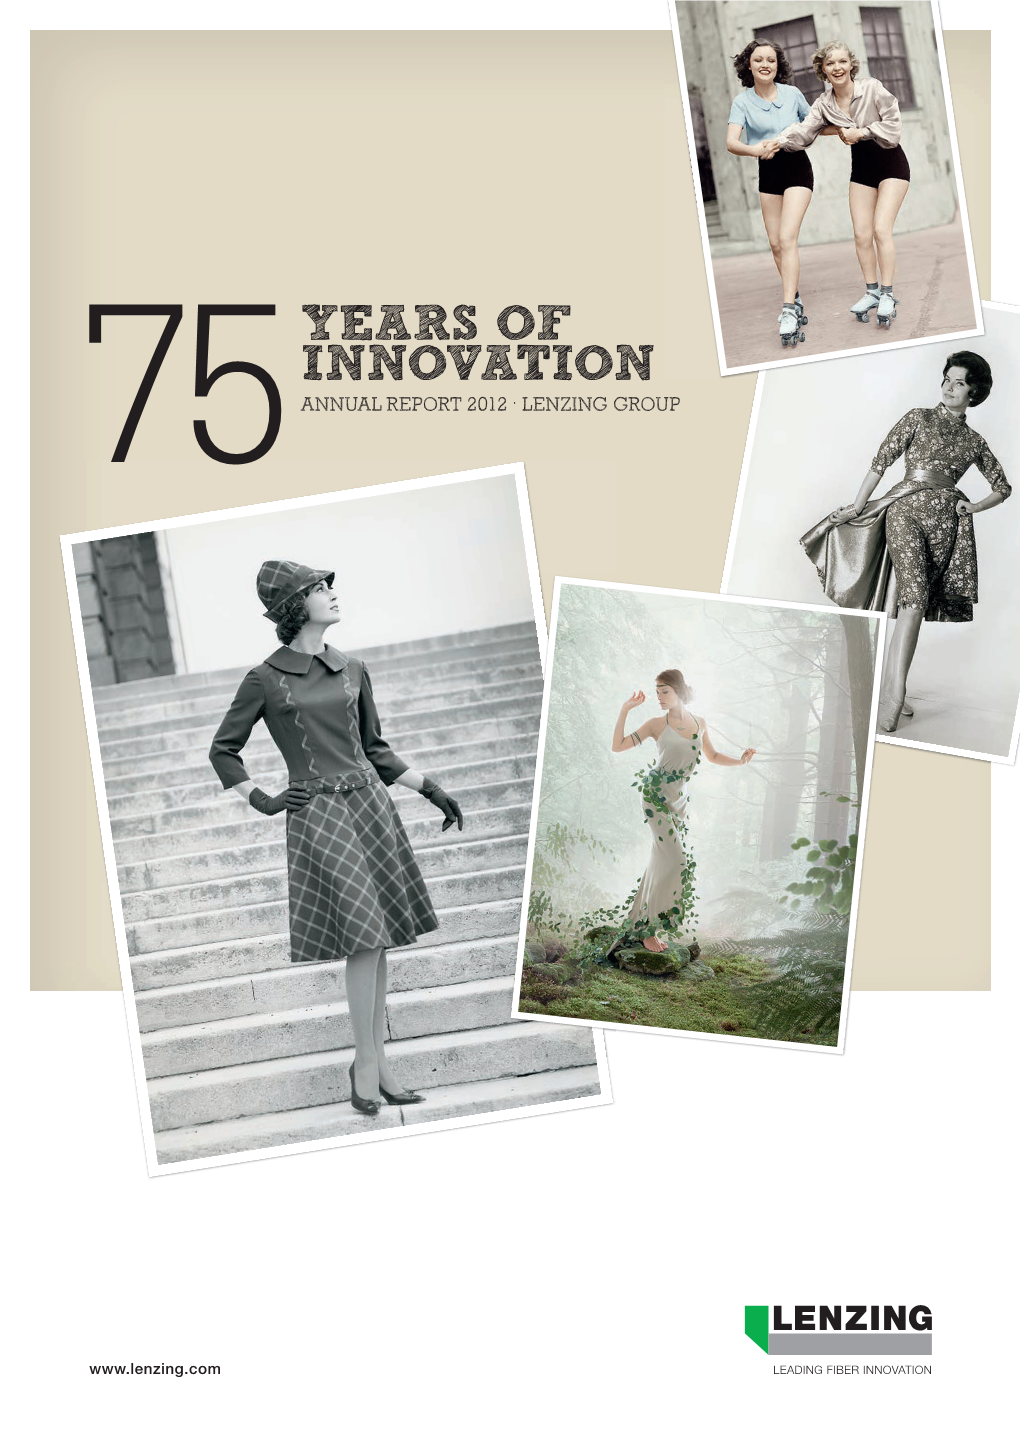 Years of Innovation Annual Report 2012